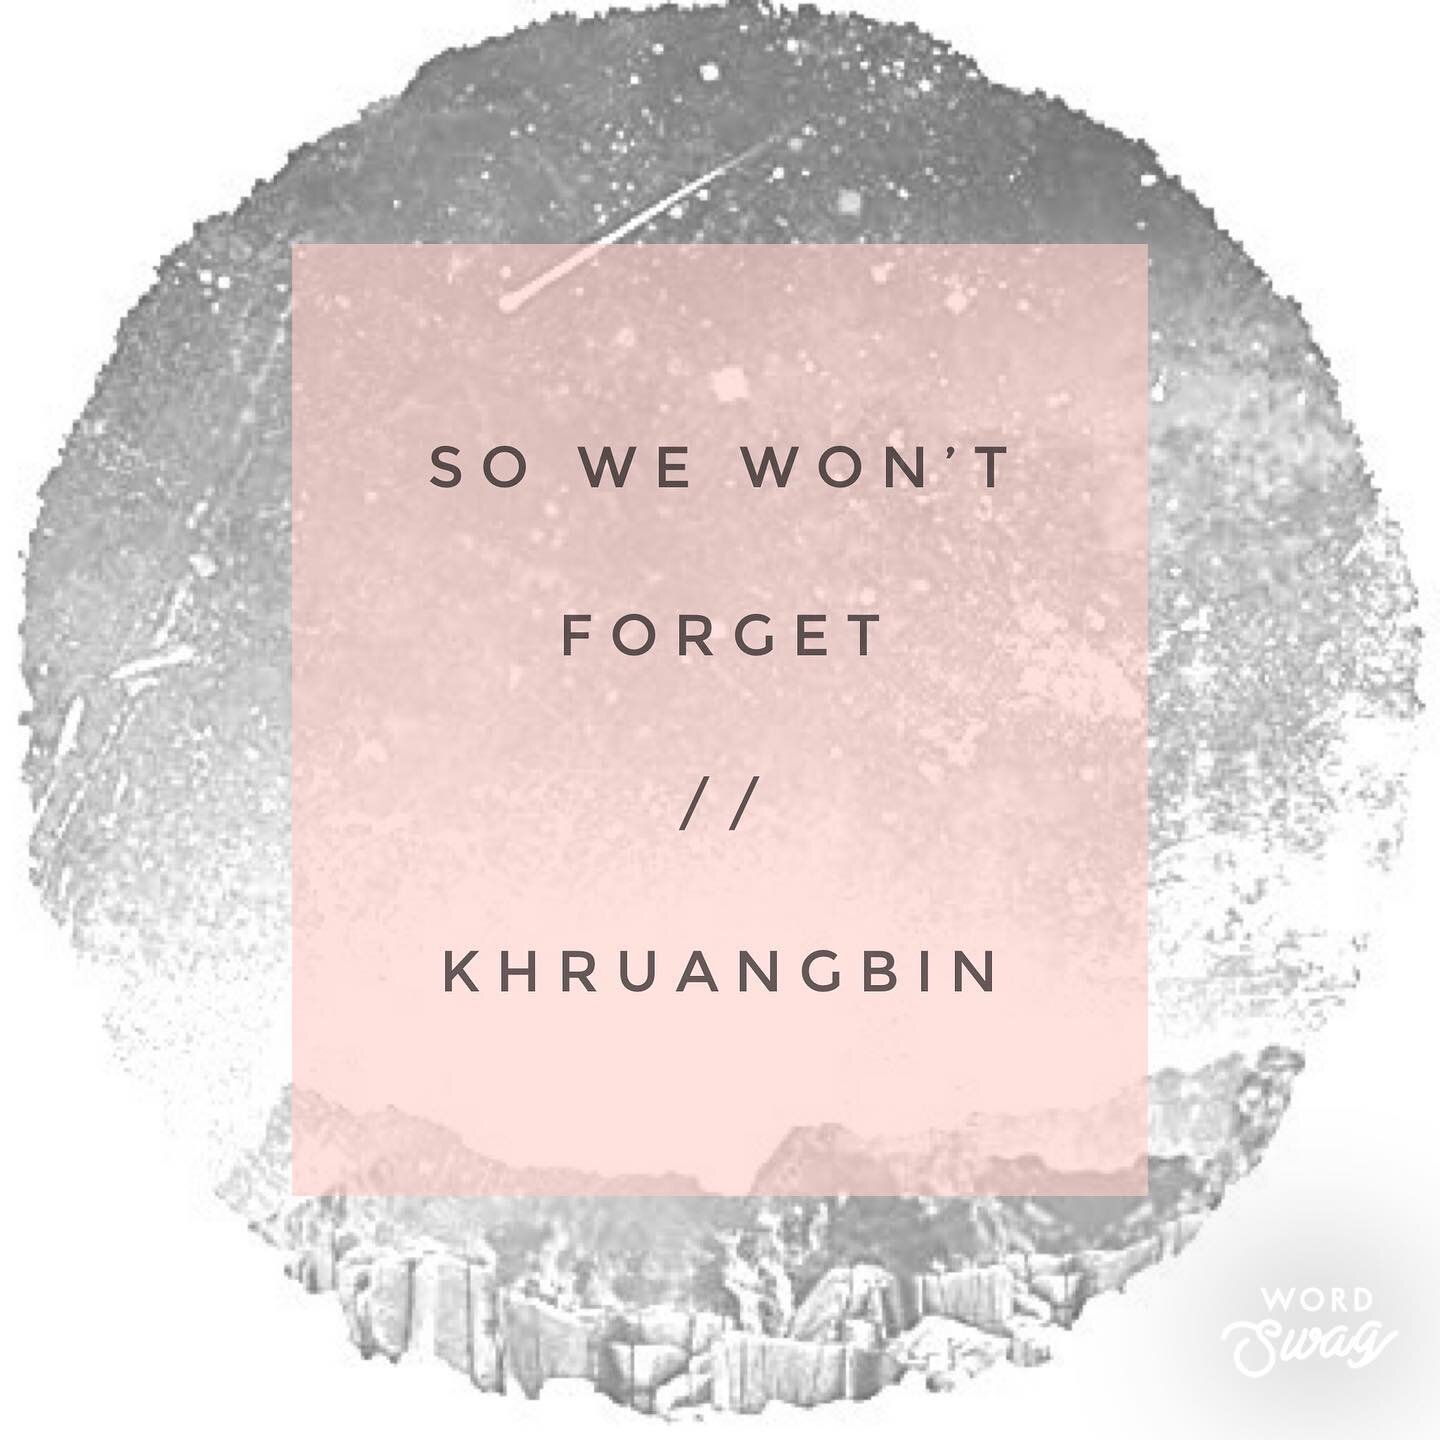 Listening Party 🙌🏼 - &ldquo;So We Won&rsquo;t Forget&rdquo; by Khruangbin // Somewhere between North African Funk and smooth American psychedelia these guys have planted a flag. So good. Cocktail to this.